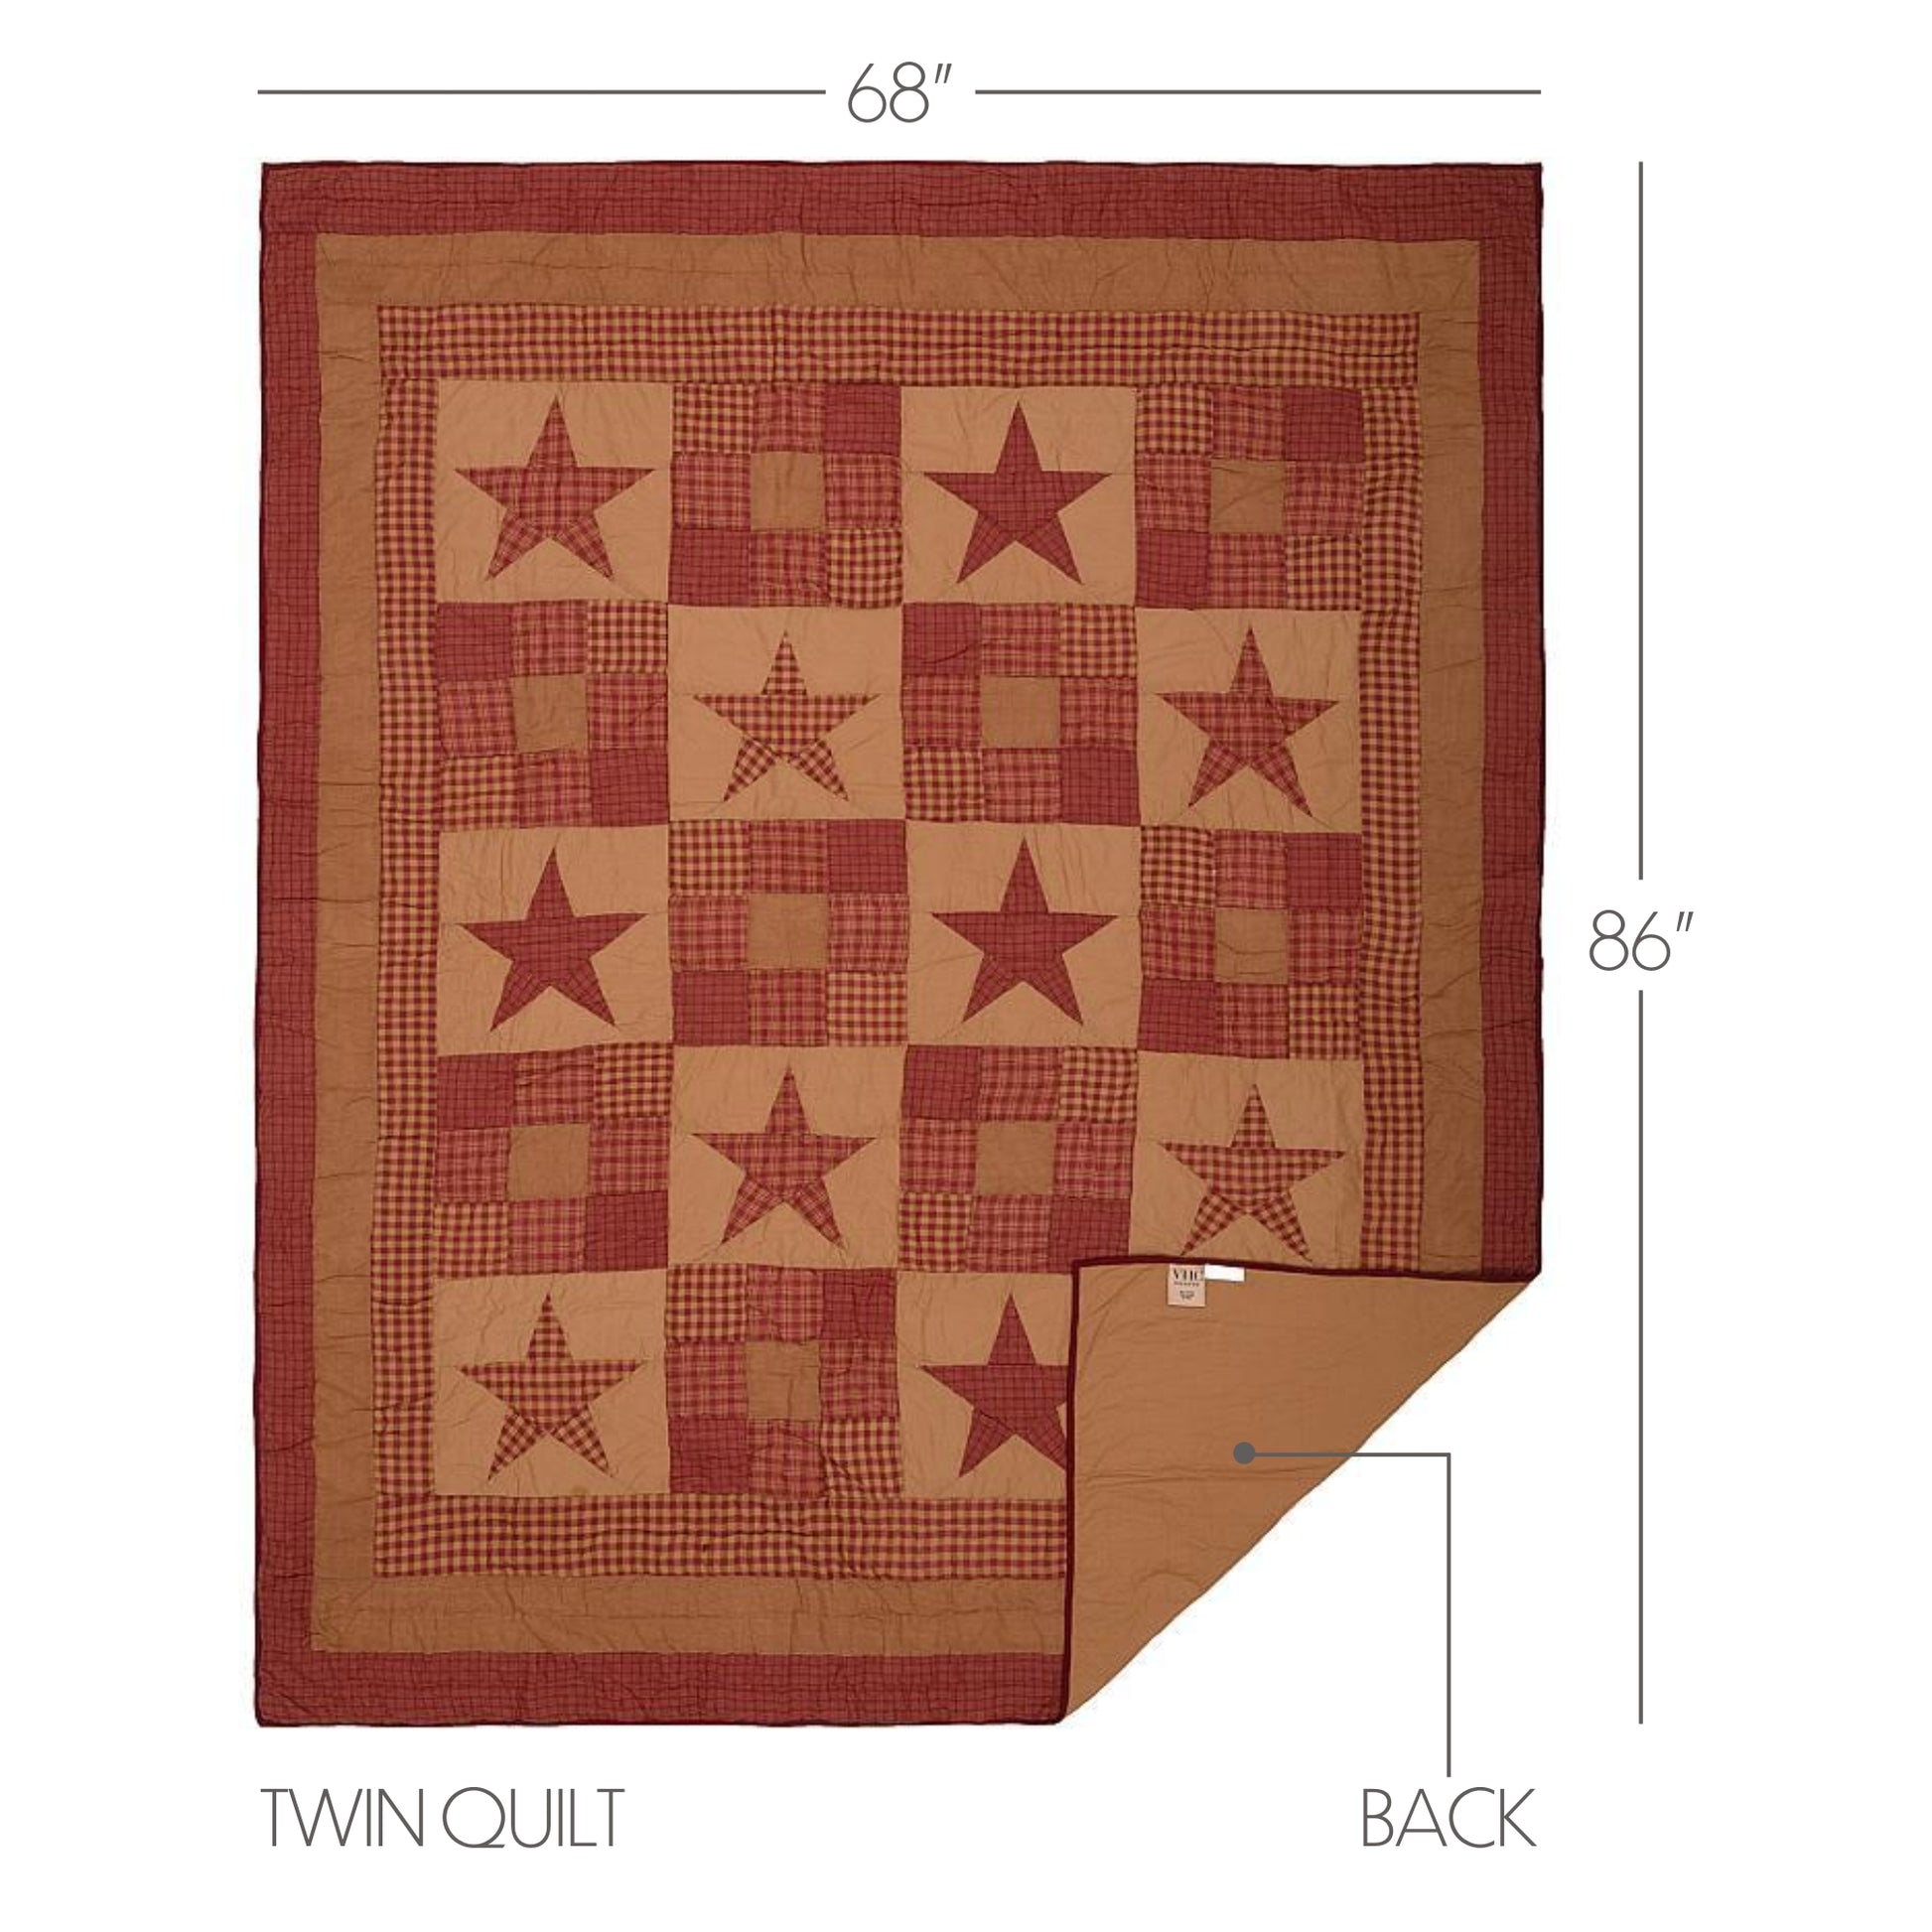 13612-Ninepatch-Star-Twin-Quilt-68Wx86L-image-1